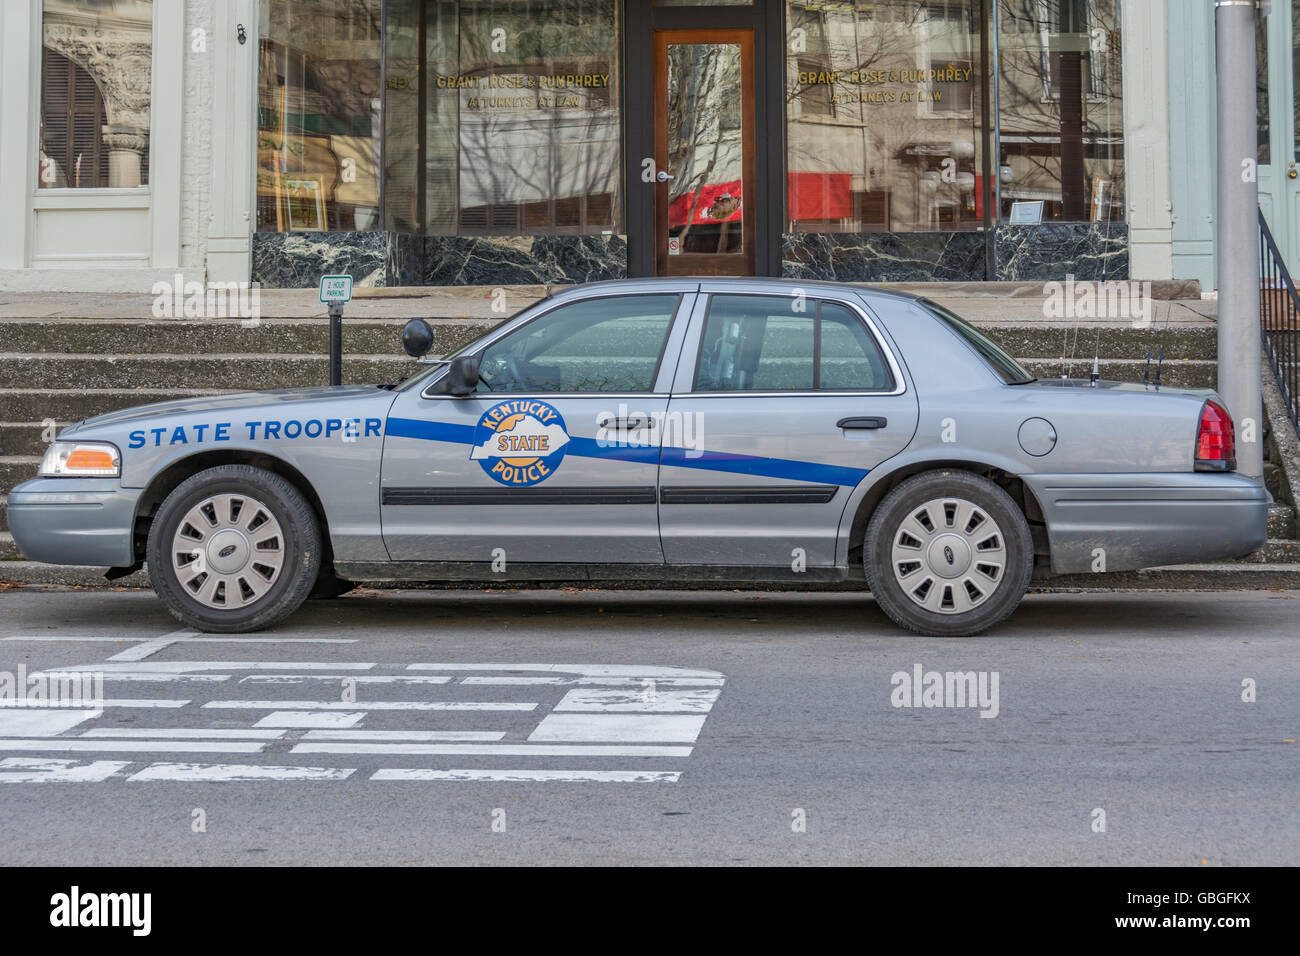 Kentucky State Trooper police car Stock Photo